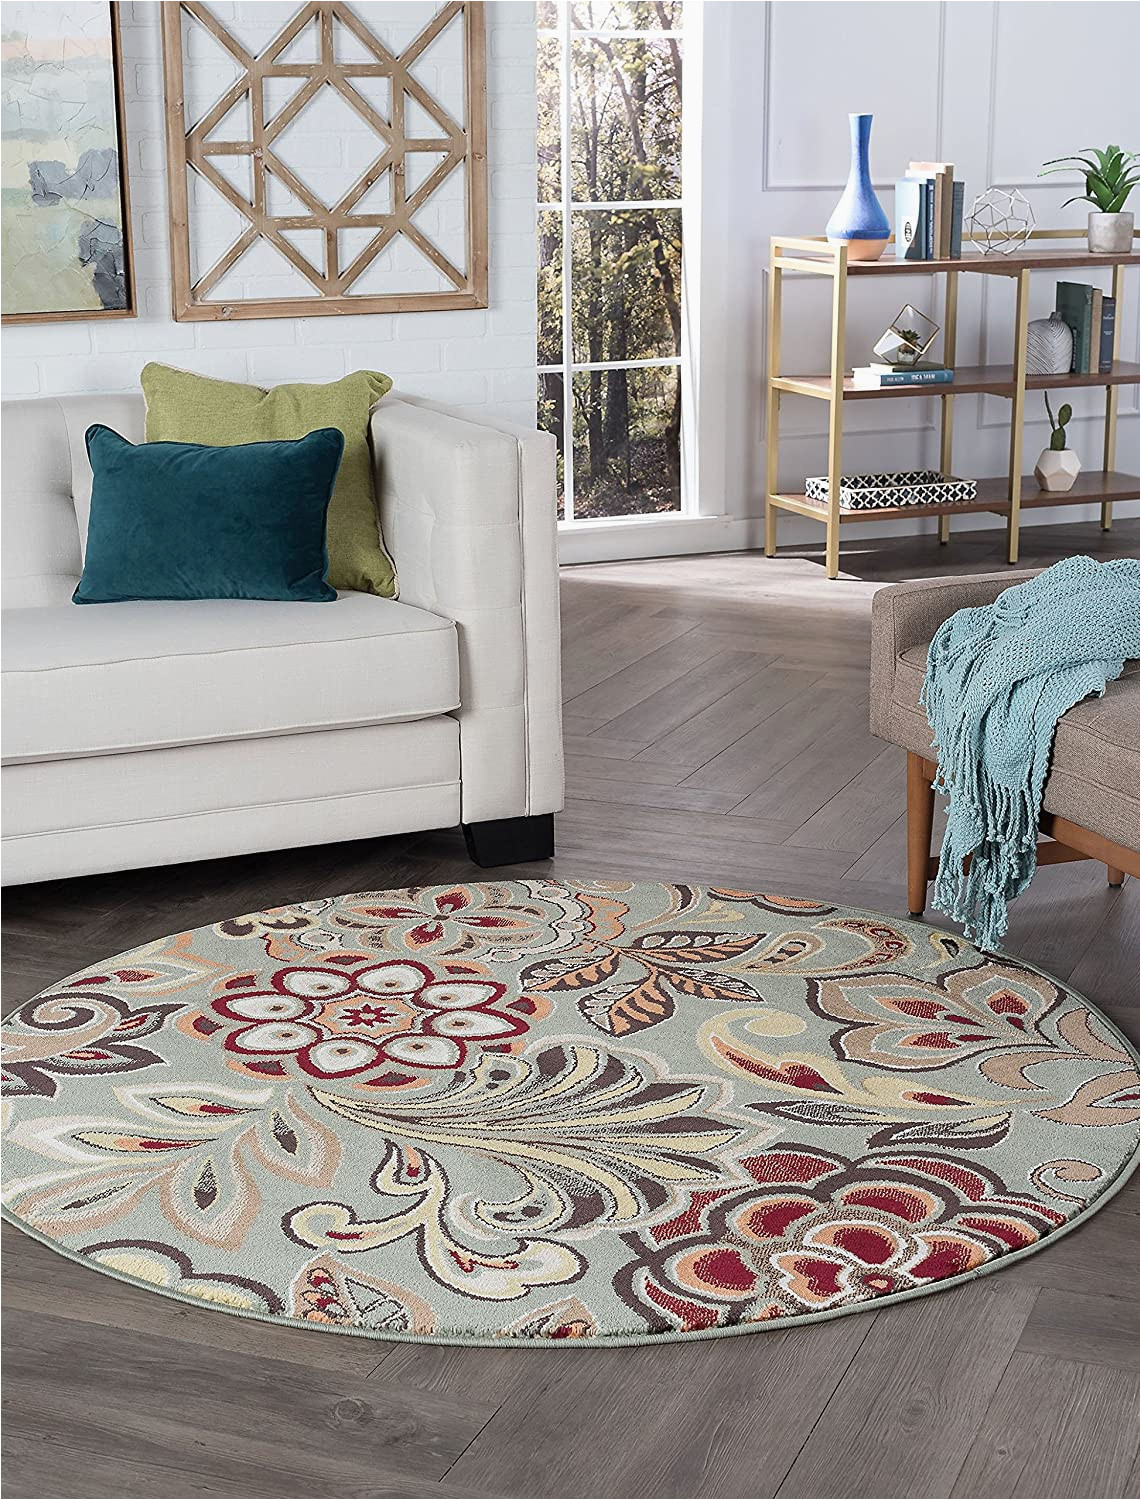 Bed Bath and Beyond Round Rugs Dilek Transitional Floral Seafoam Round area Rug 5 Round